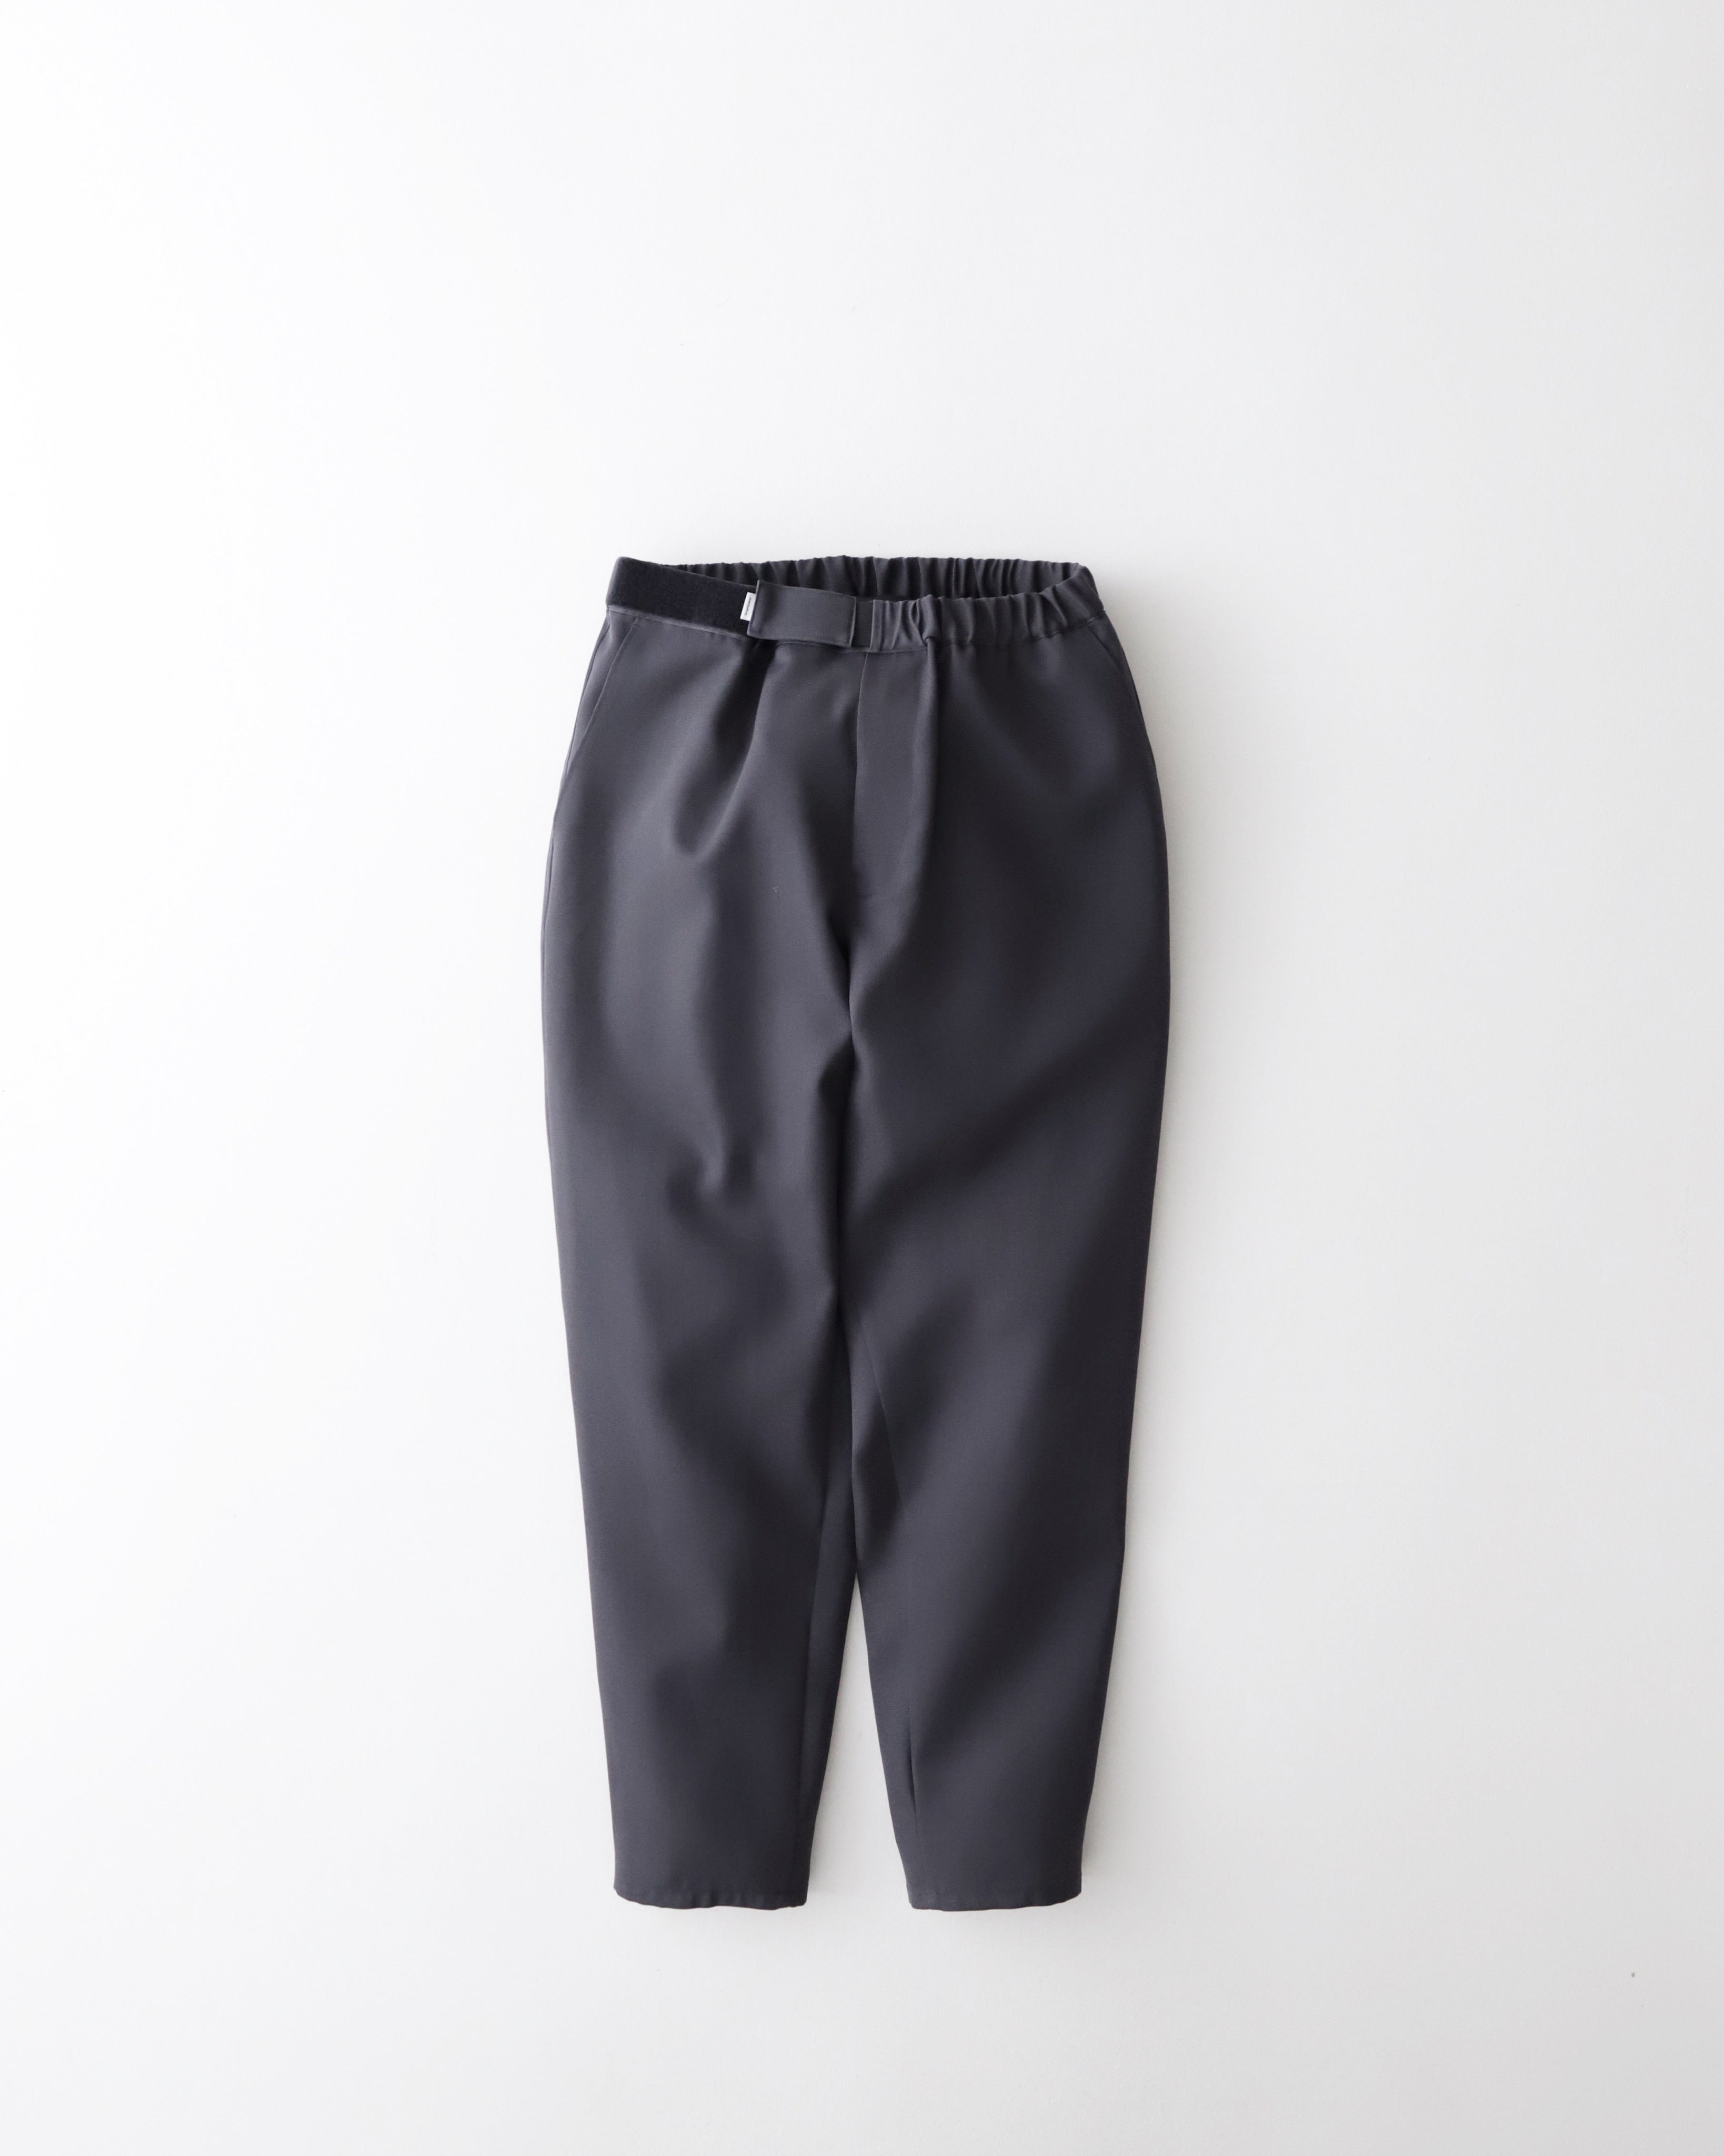 SCALE OFF WOOL CHEF PANTS